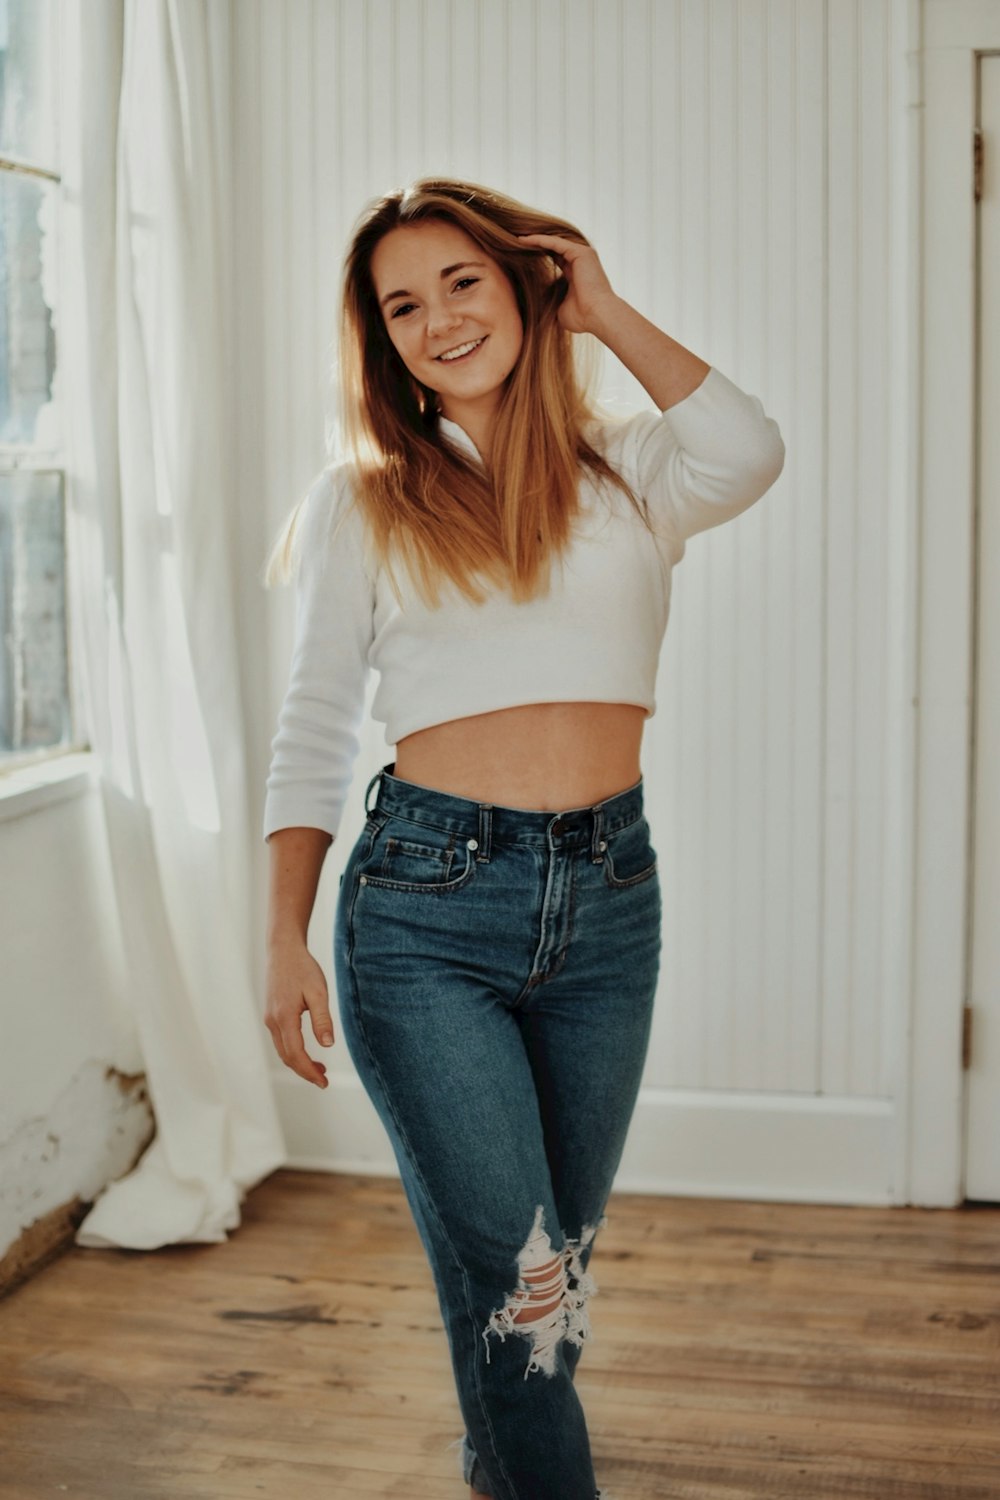 a woman in a white top and jeans posing for a picture